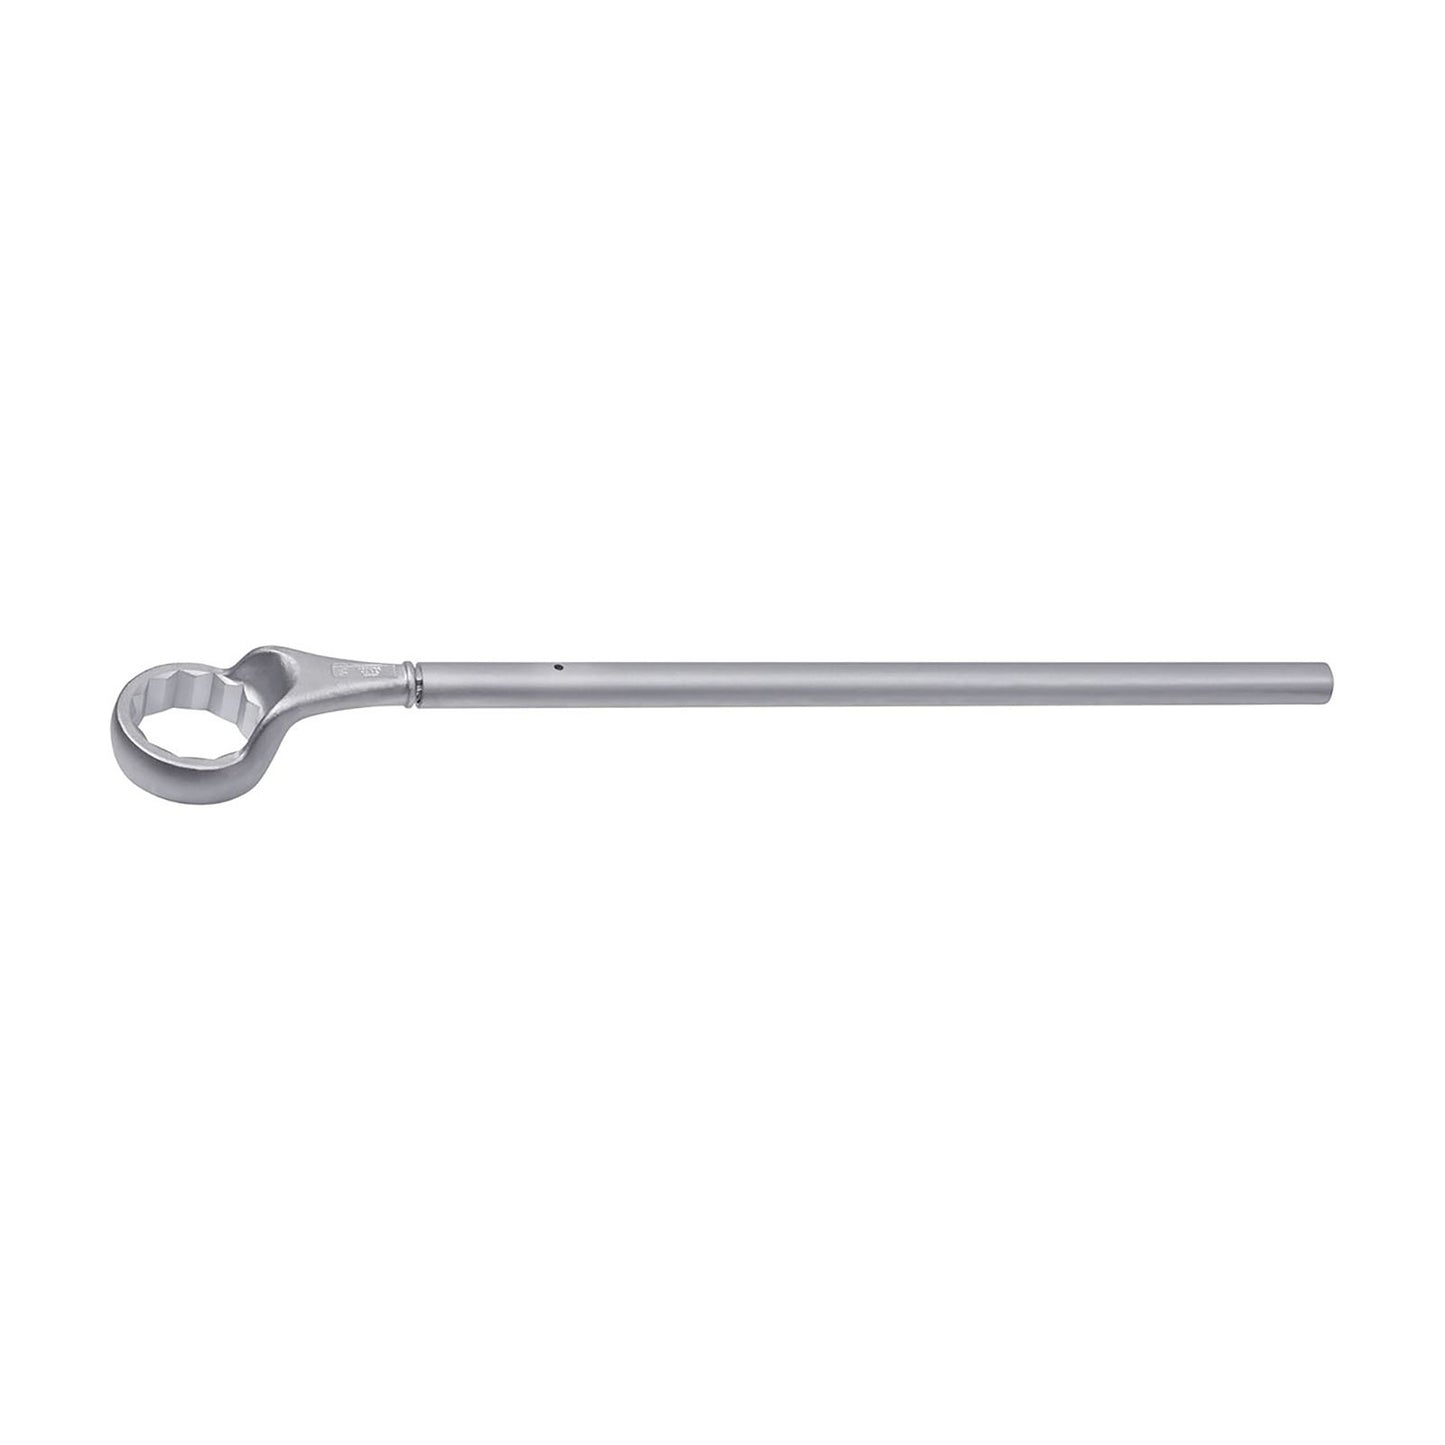 GEDORE 2 A 55 - Traction Wrench, 55mm (6034650)